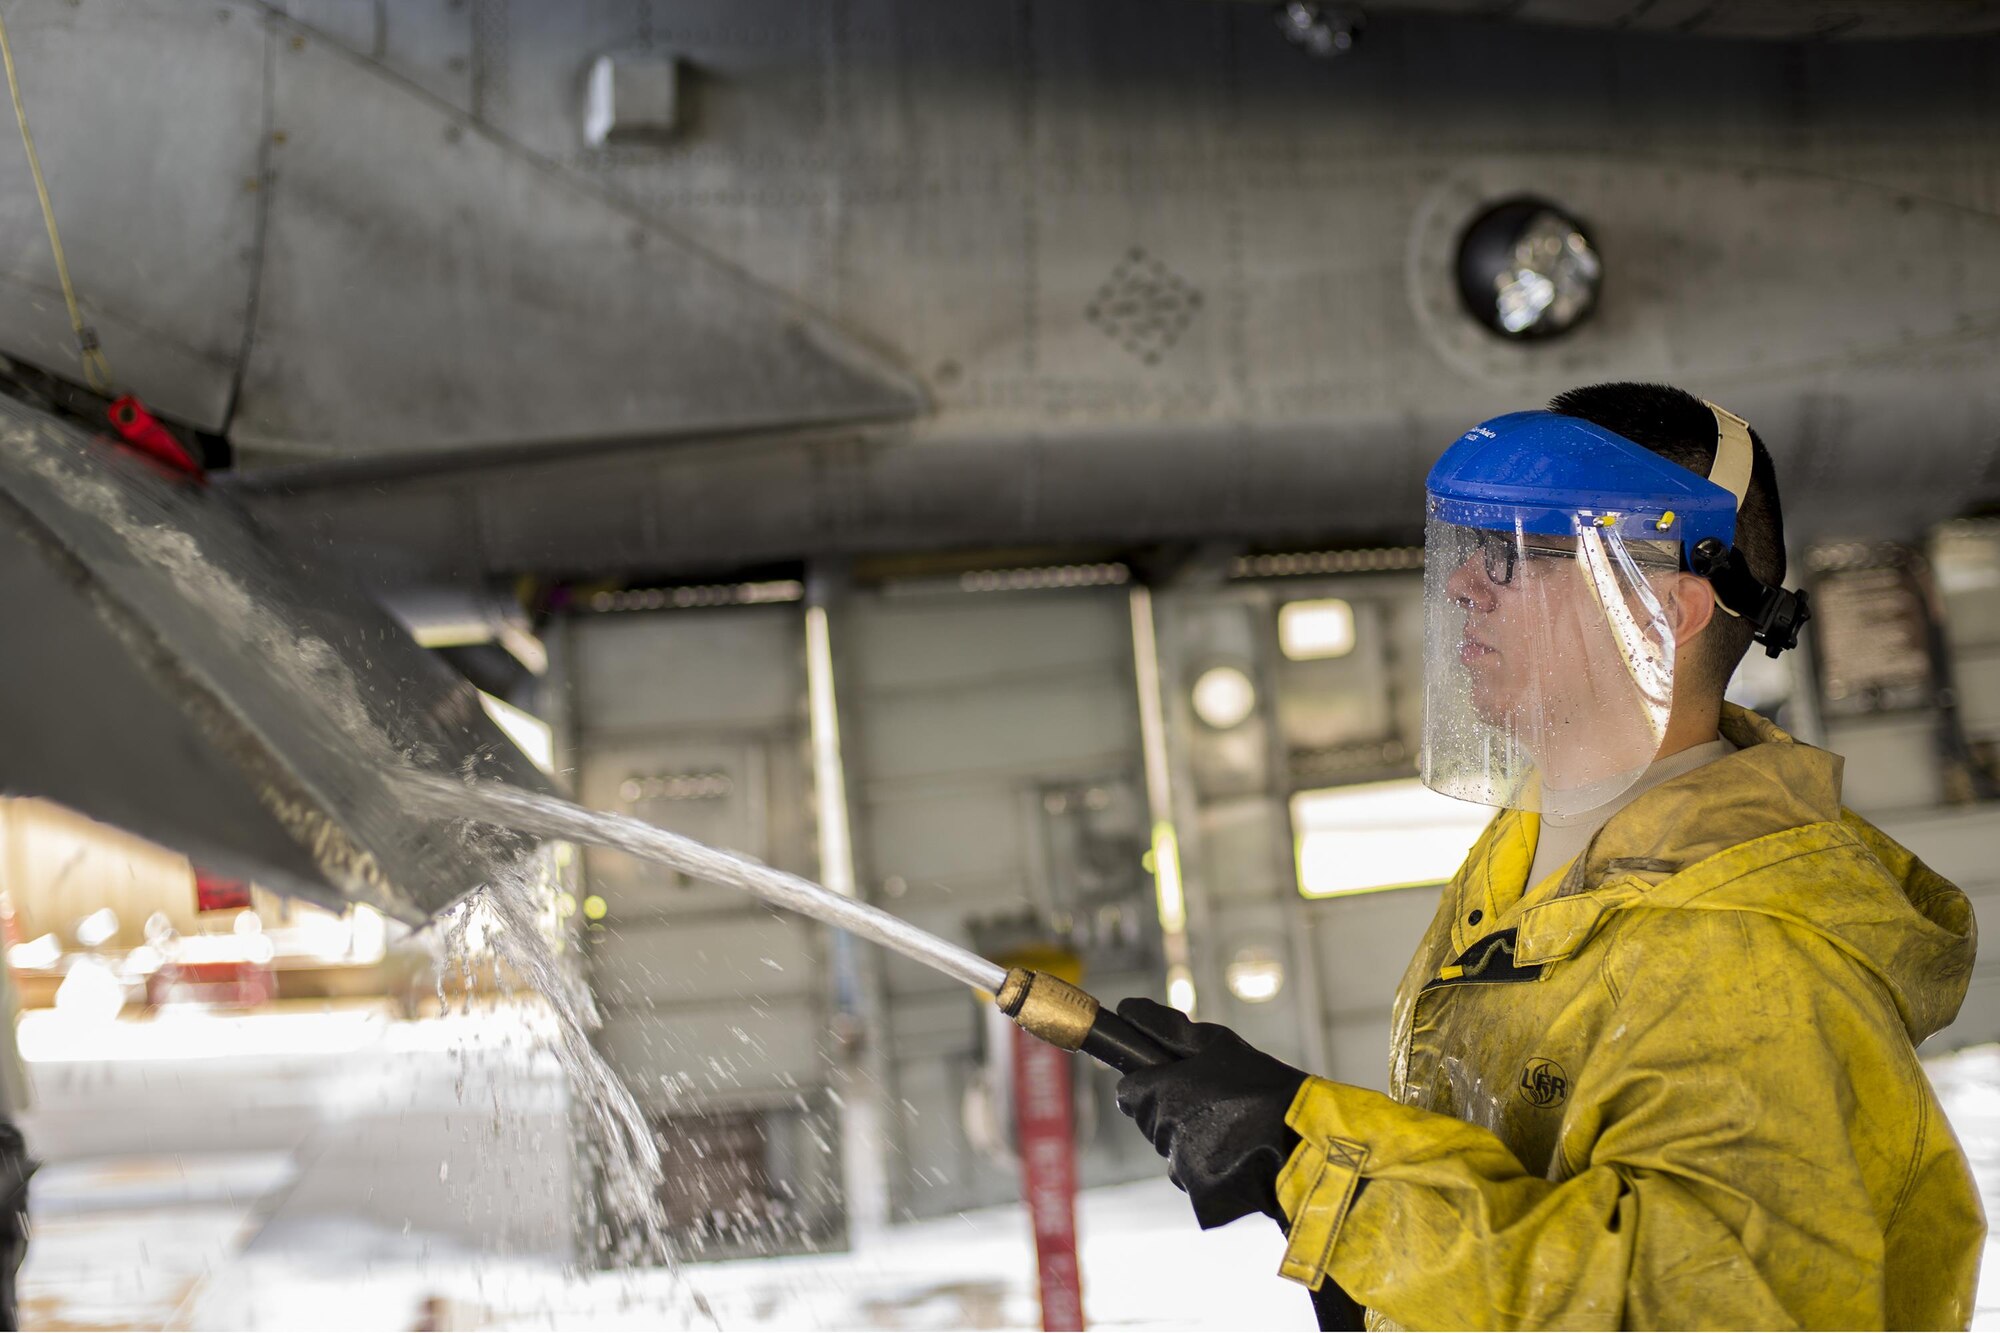 U.S. Air Force Airman 1st Class Alan Oseguera, 23d Aircraft Maintenance Squadron weapons technician, rinses the wing of an A-10C Thunderbolt II, June 16, 2016, at Moody Air Force Base, Ga. Washing an A-10 can take anywhere between four and eight hours depending on how many Airmen are involved. (U.S. Air Force photo by Airman Daniel Snider/Released)